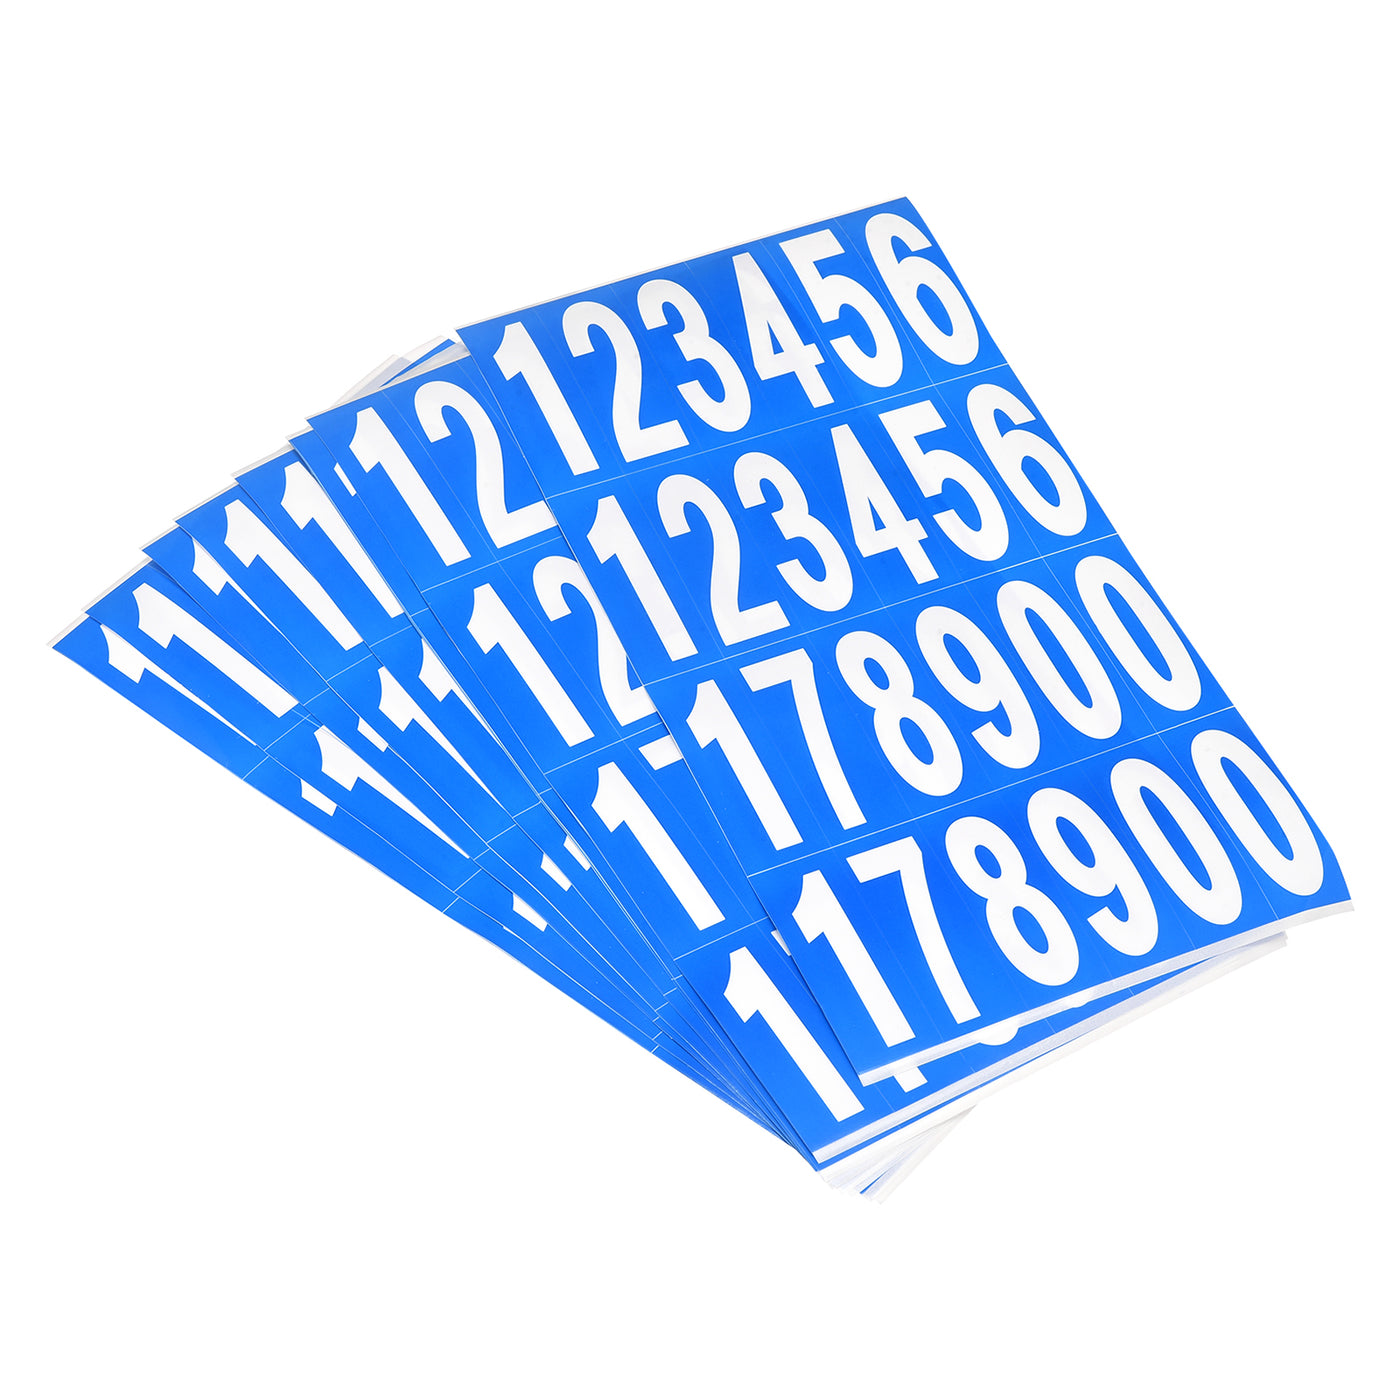 Harfington Mailbox Numbers Sticker Label Number Self Adhesive PVC Vinyl Label Blue and White 76x25mm for Mailbox Signs, Pack of 10